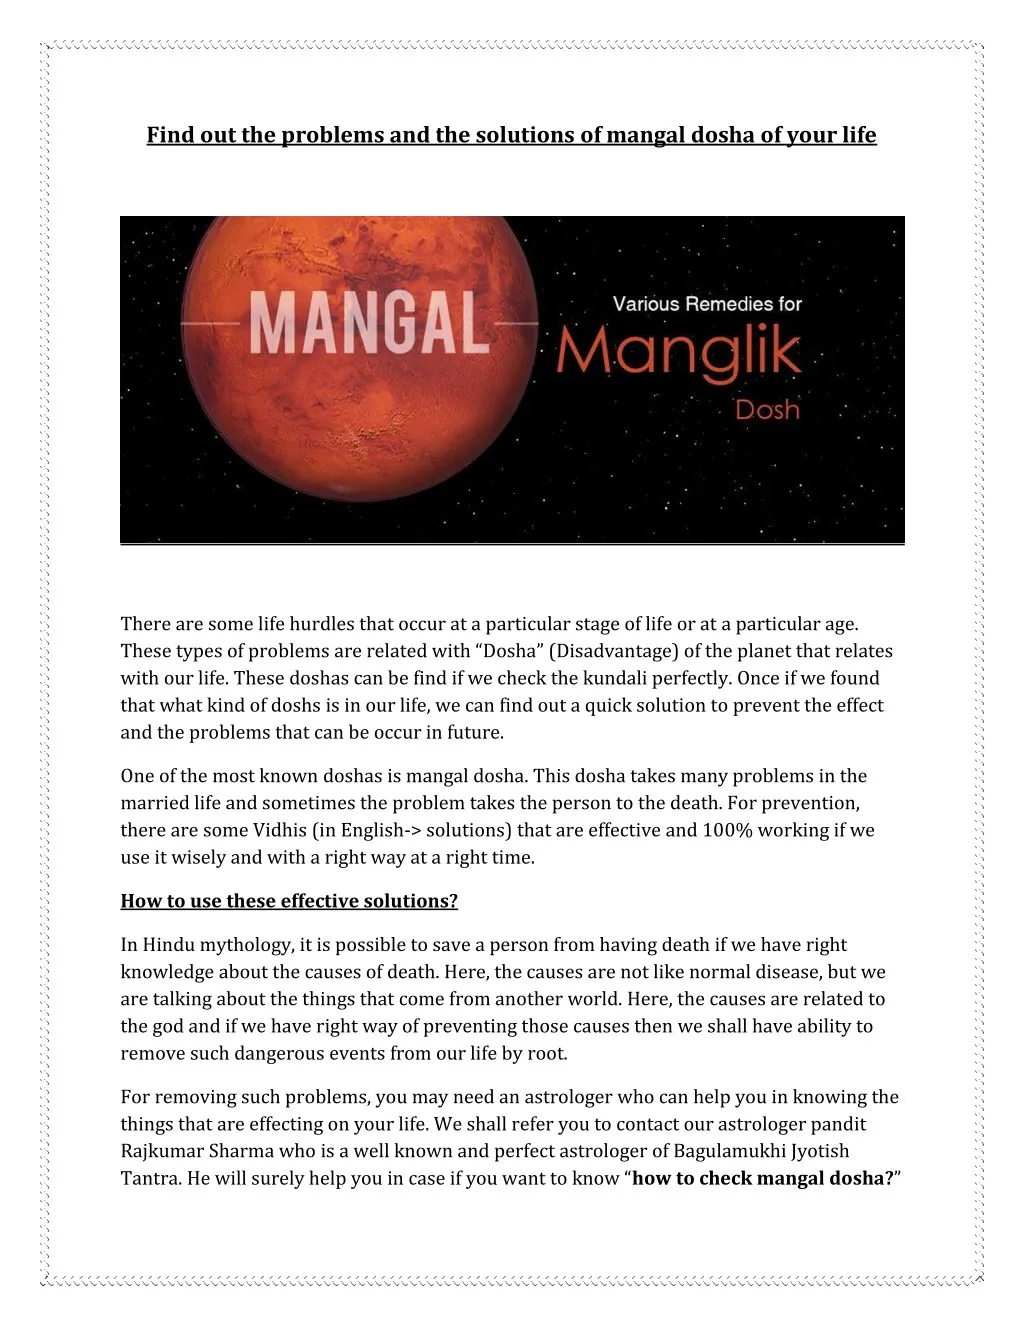 find out the problems and the solutions of mangal